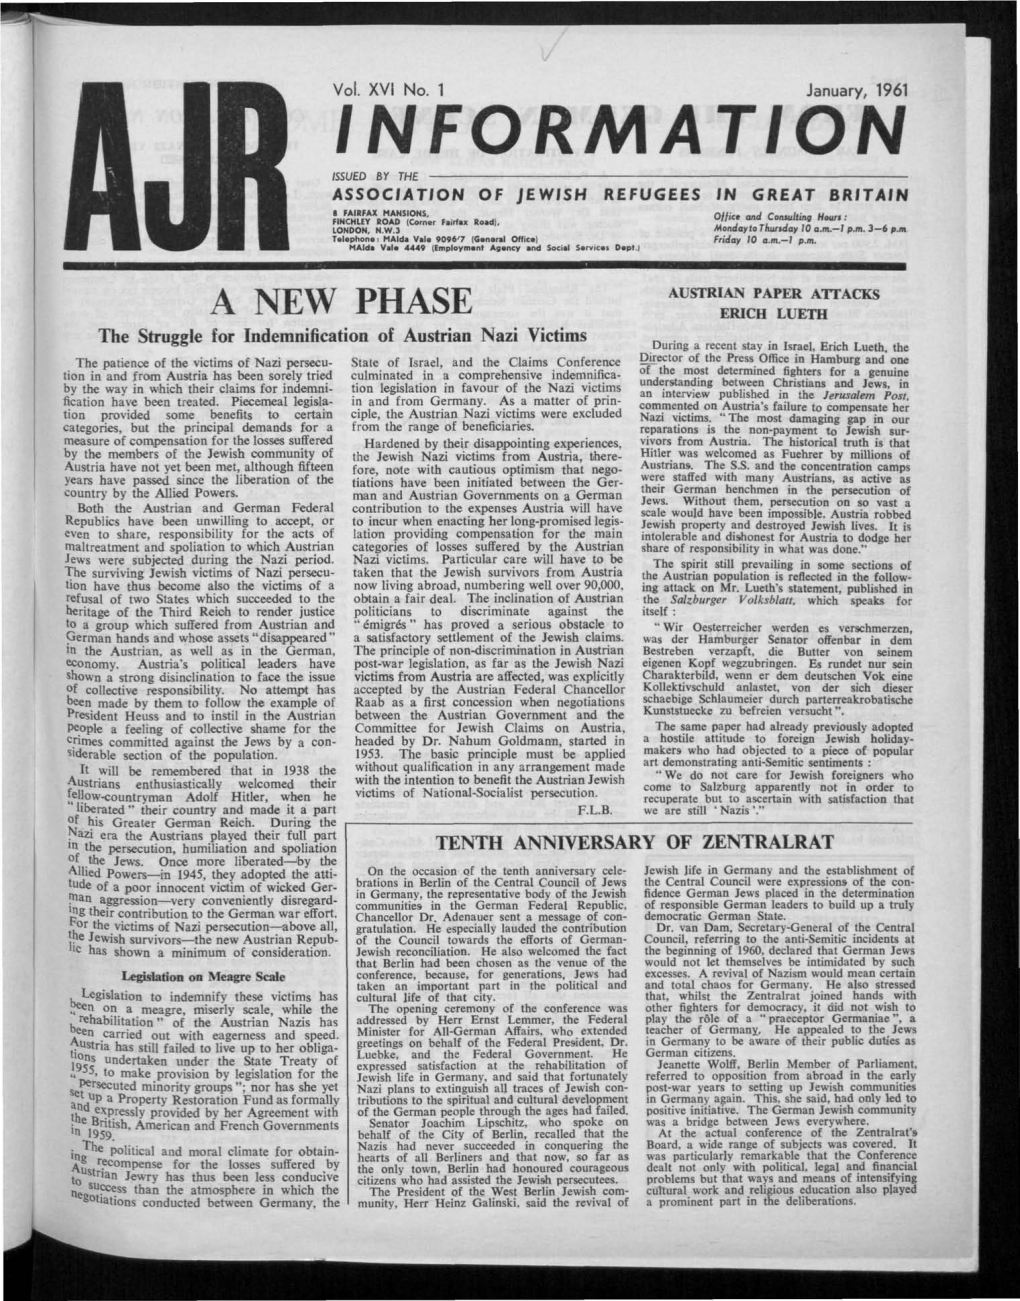 Information Issued by the Association of Jewish Refugees in Great Britain